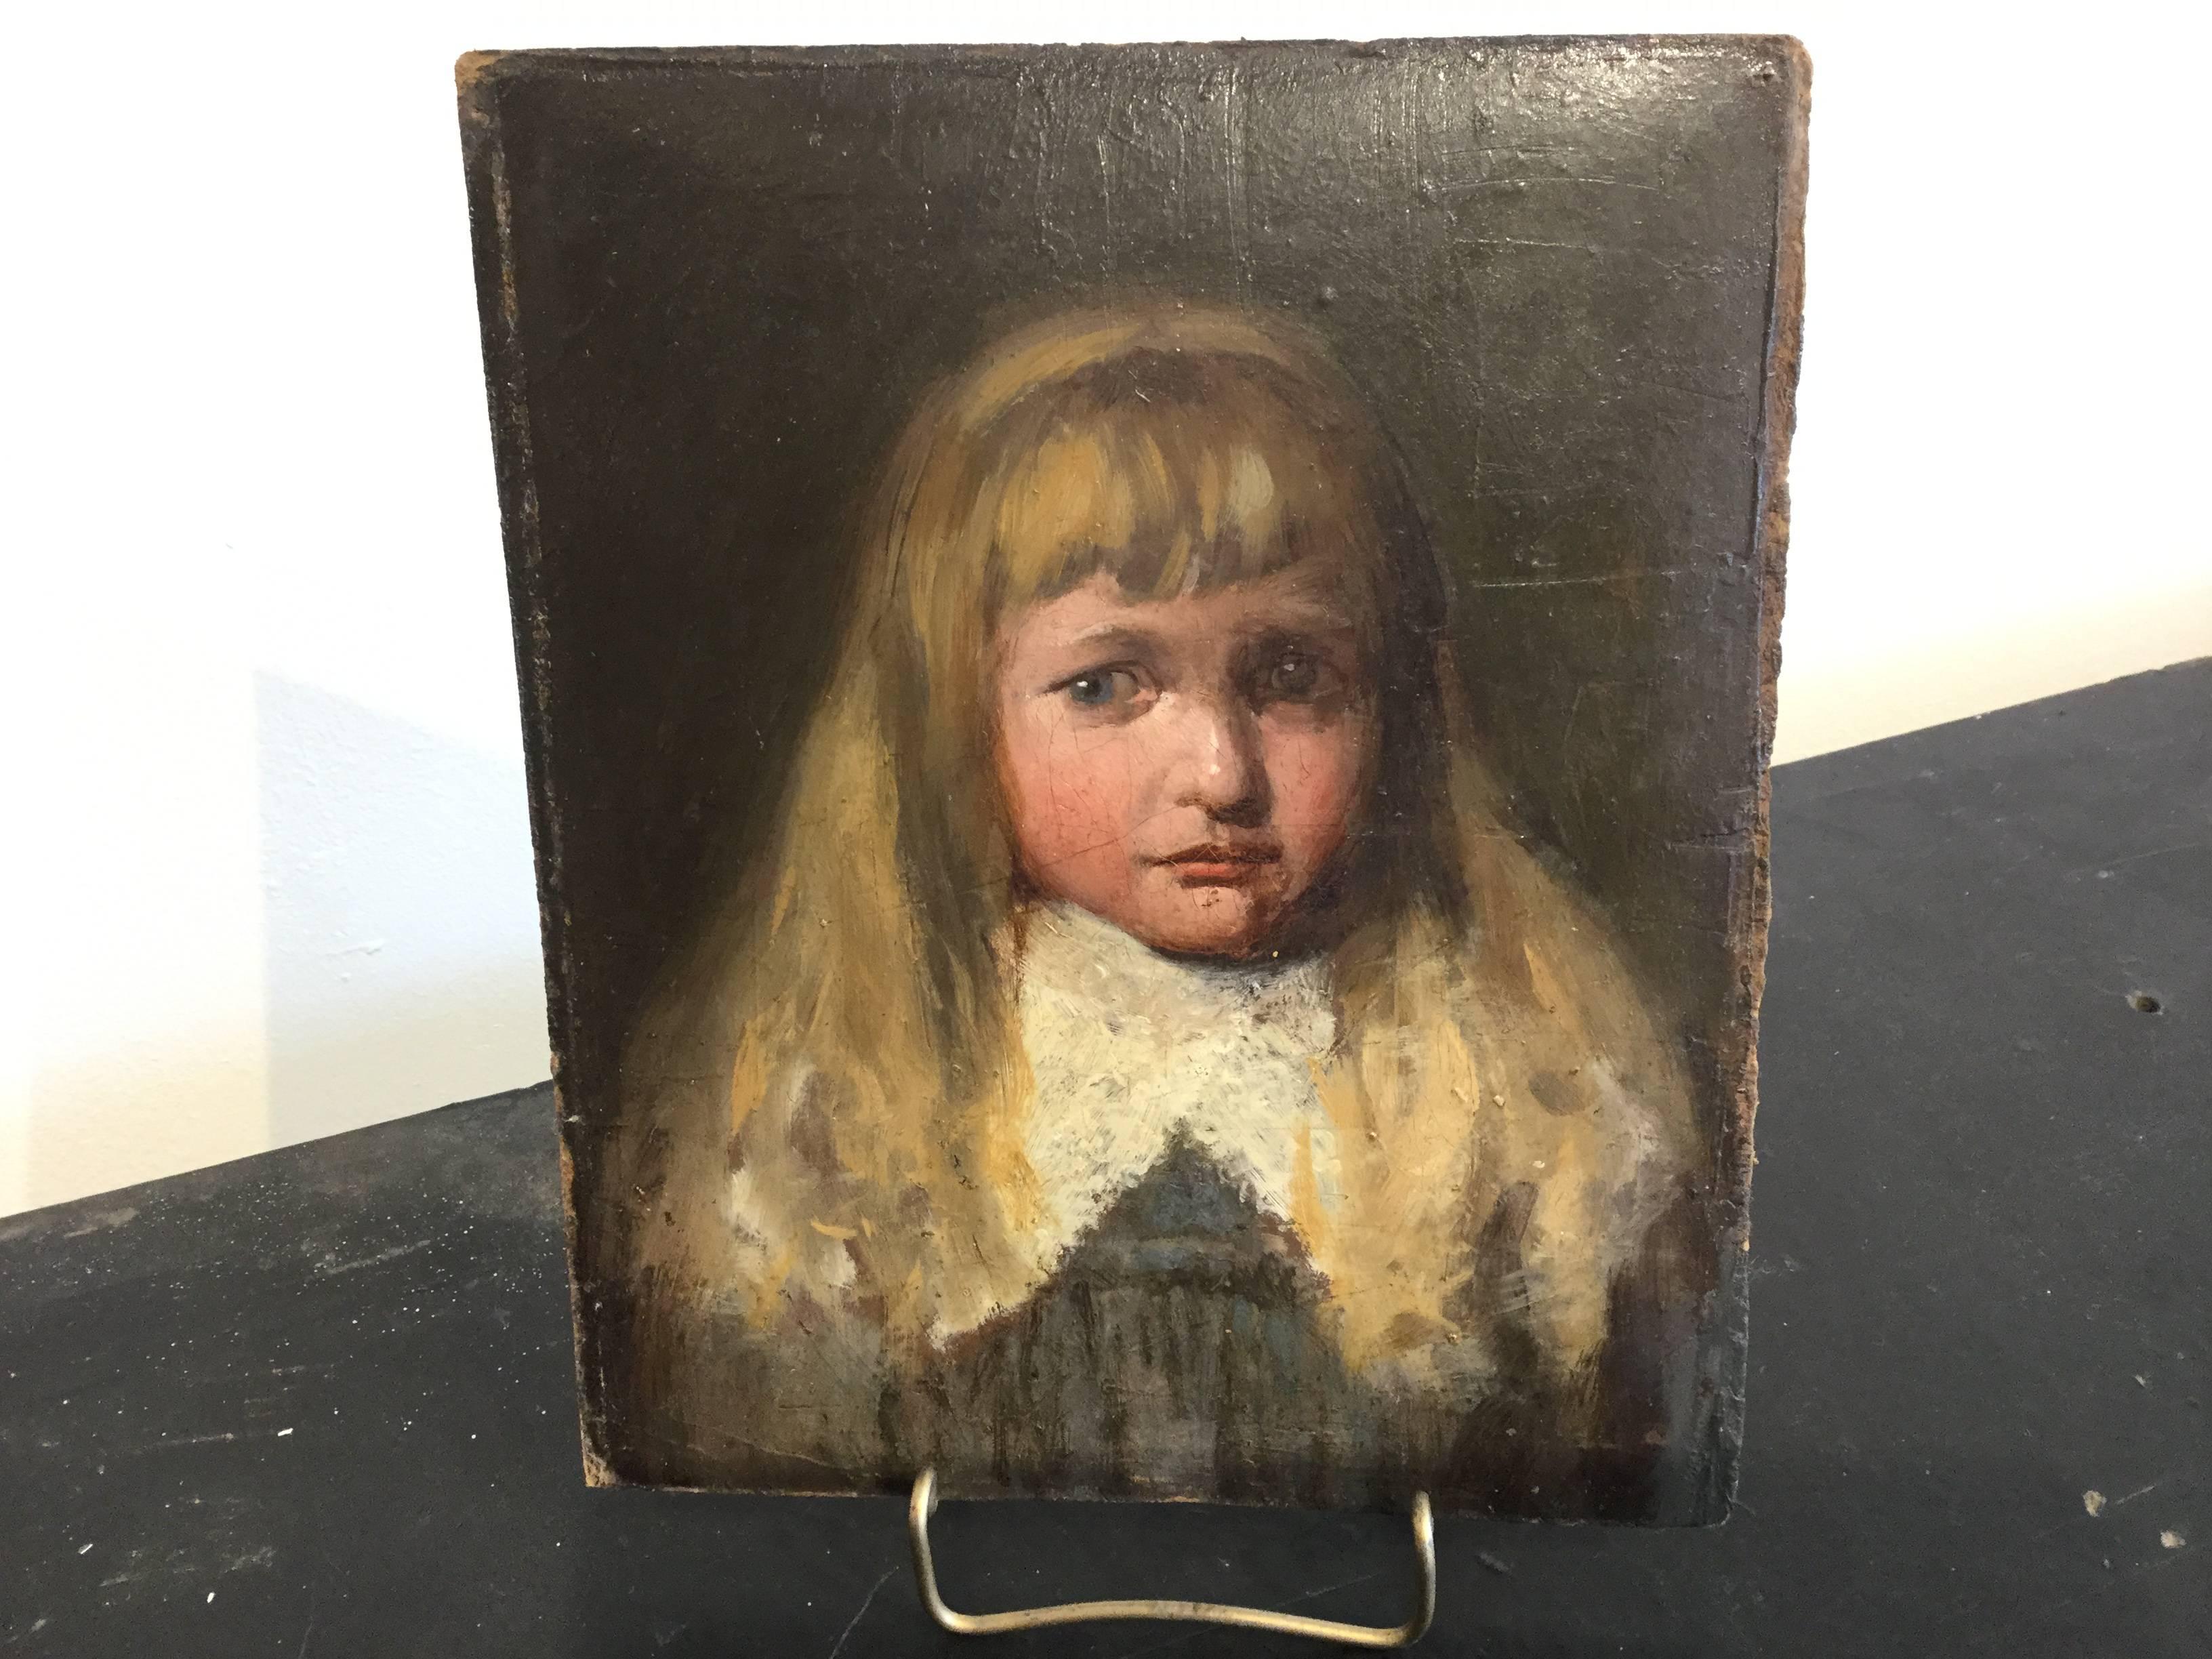 19th century child portrait oil painting on board. Emotional expression. She may have been unhappy about having to sit for her portrait.